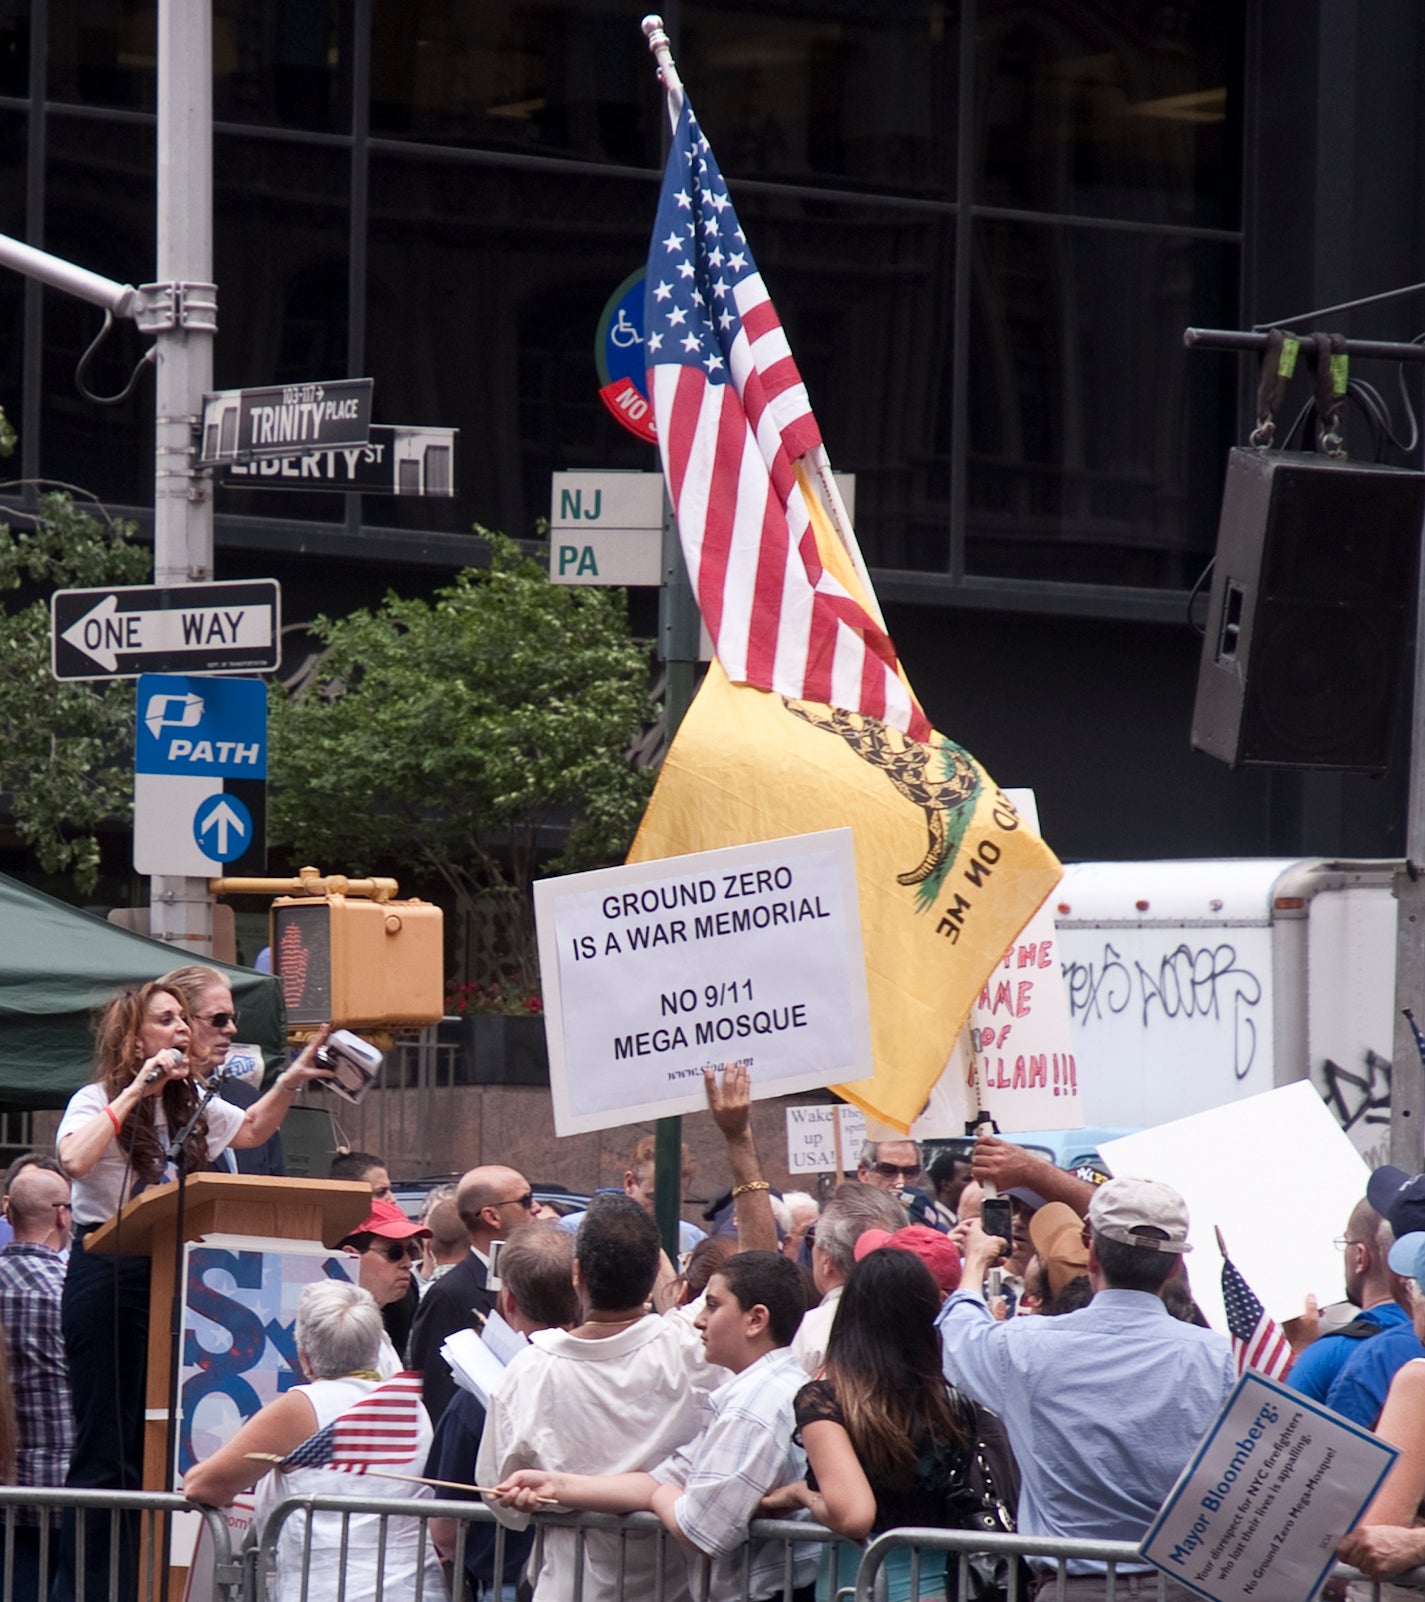 Pamela Geller speaks behind a podium at a rally. A protester's sign near the front of the crowd reads "Ground Zero is a War Memorial. No 9/11 mega mosque!"